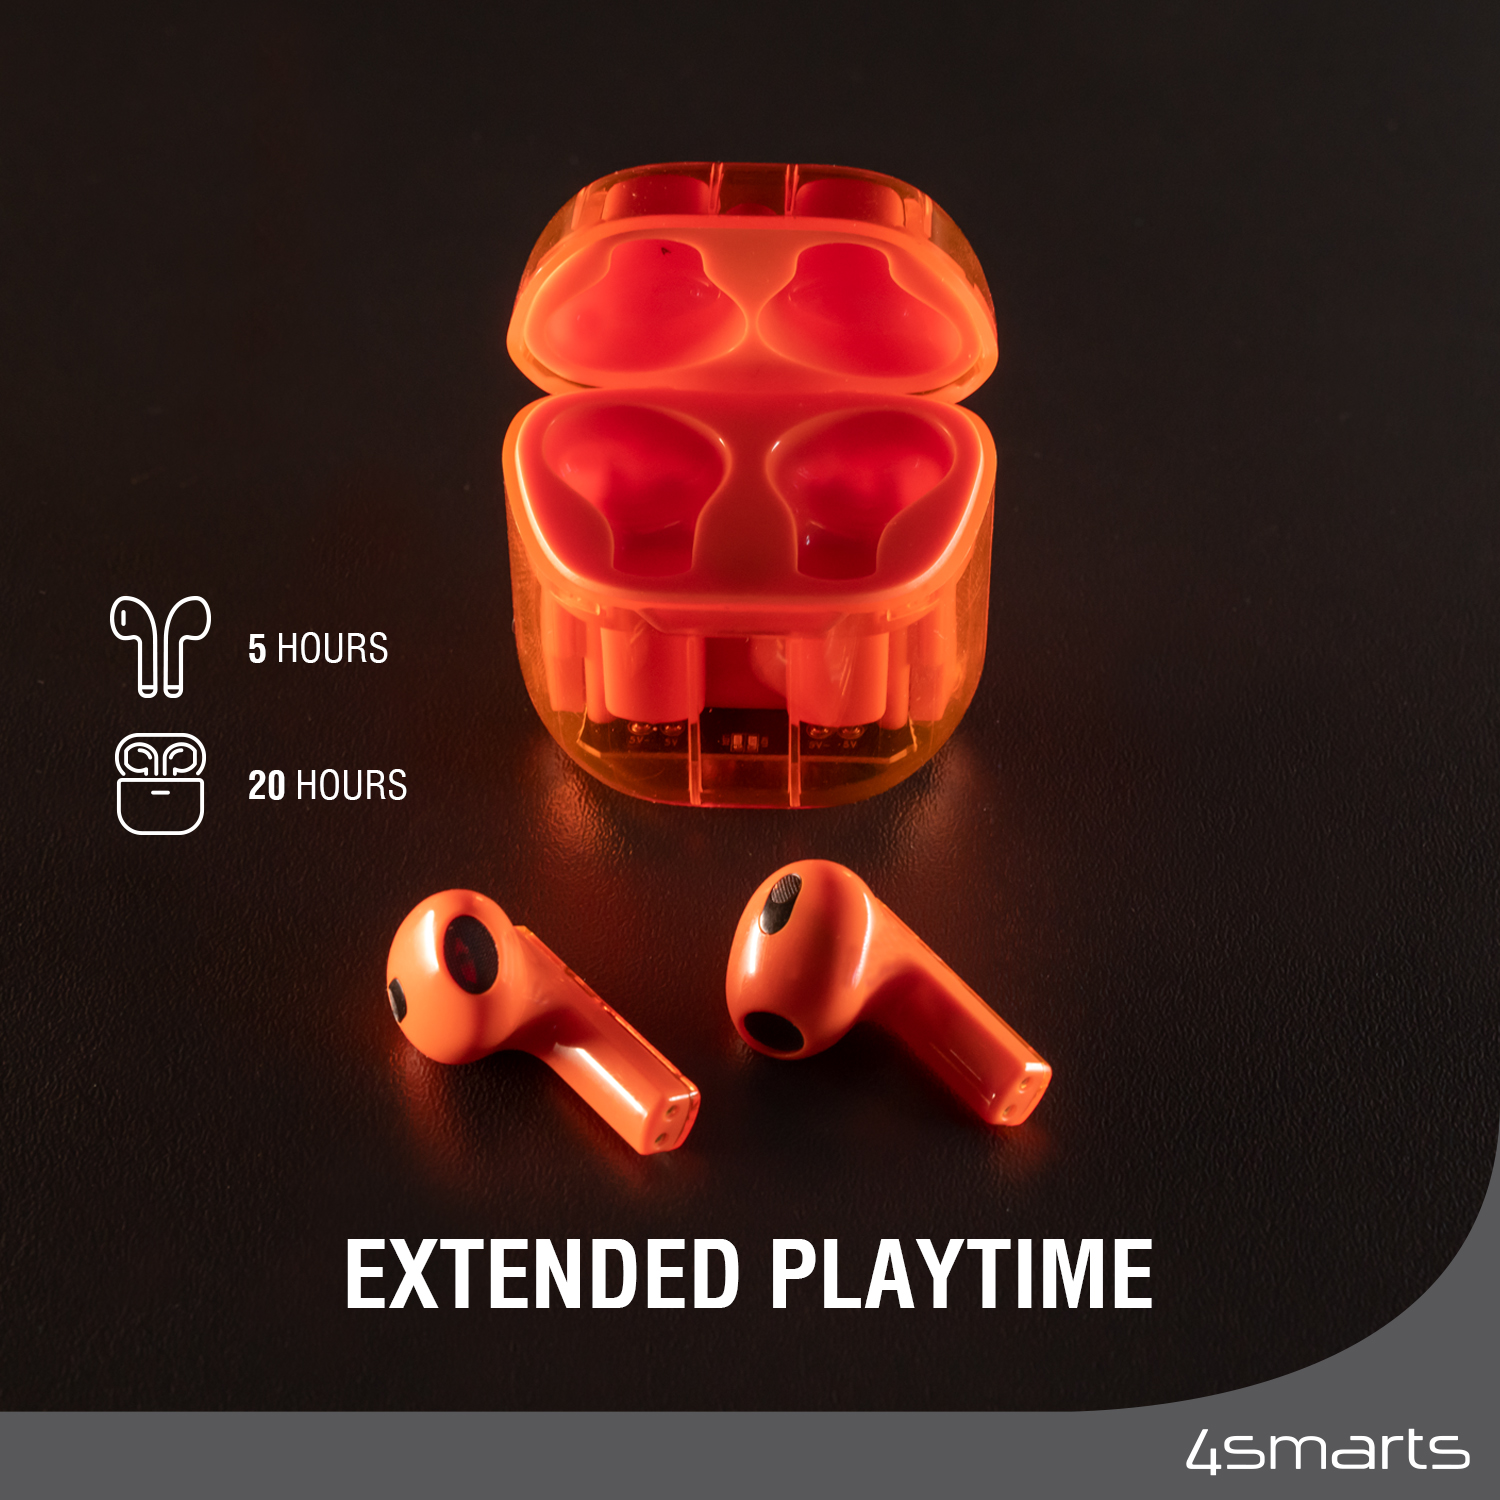 The TWS Lucid bluetooth headphones have extended playtime.